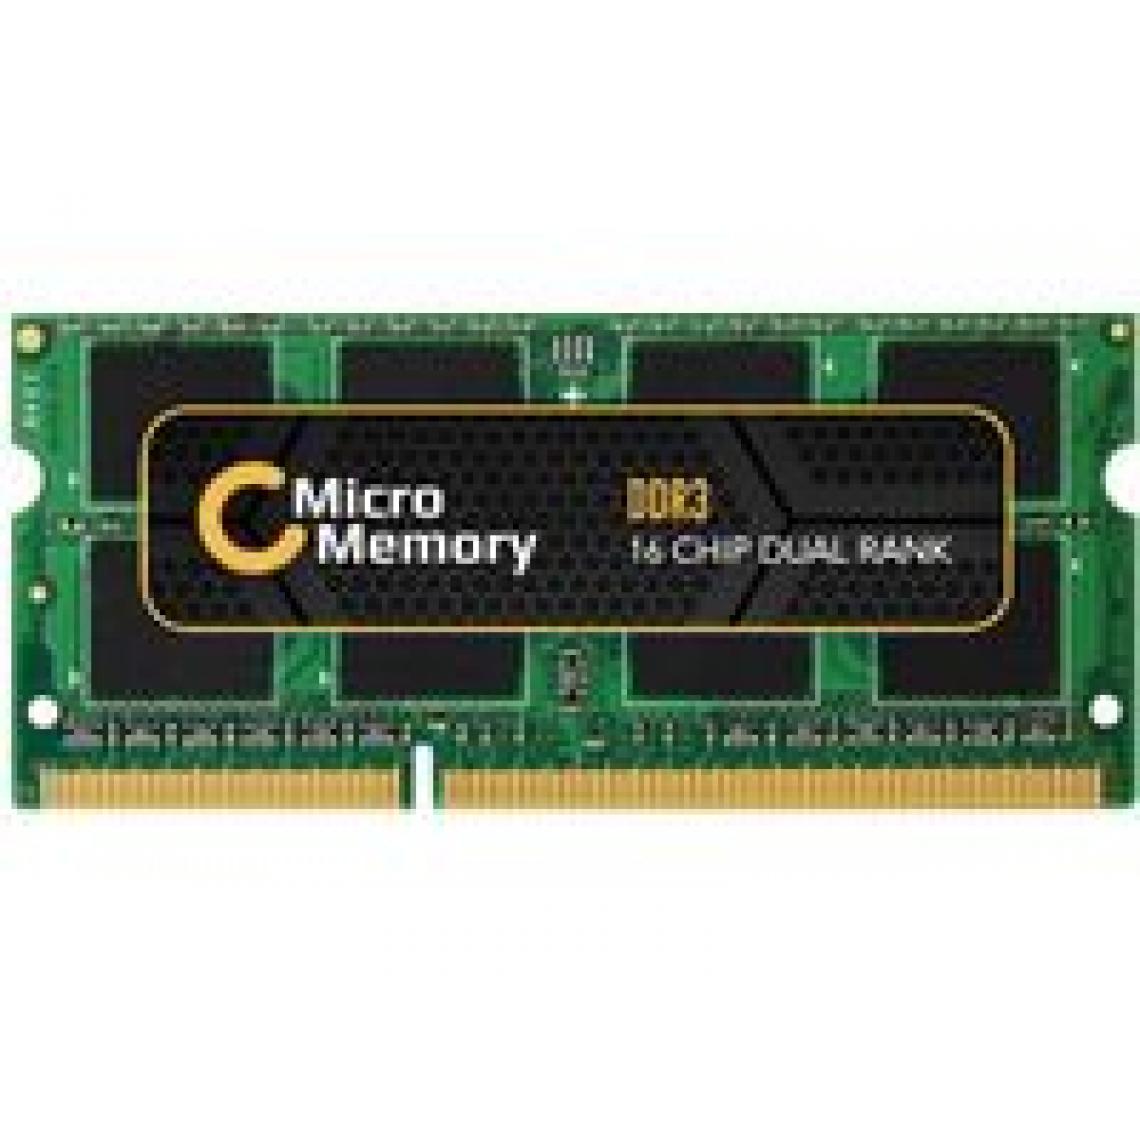 Because Music - 4GB DDR3 1333MHZ SO-DIMM SO-DIMM Module - RAM PC Fixe